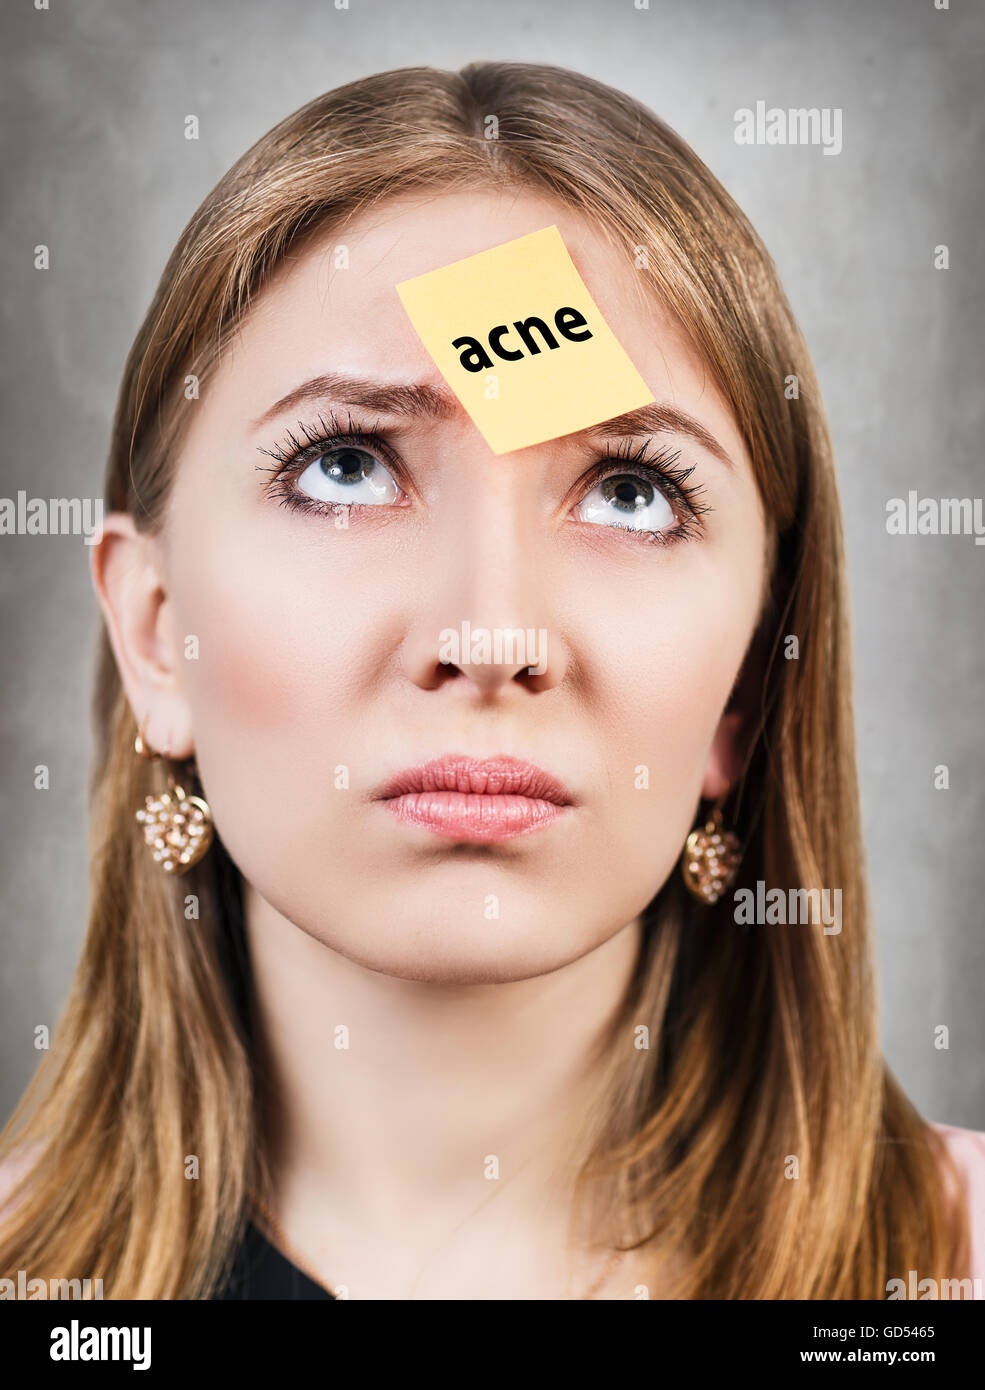 Confused woman with a sticker on her forehead Stock Photo